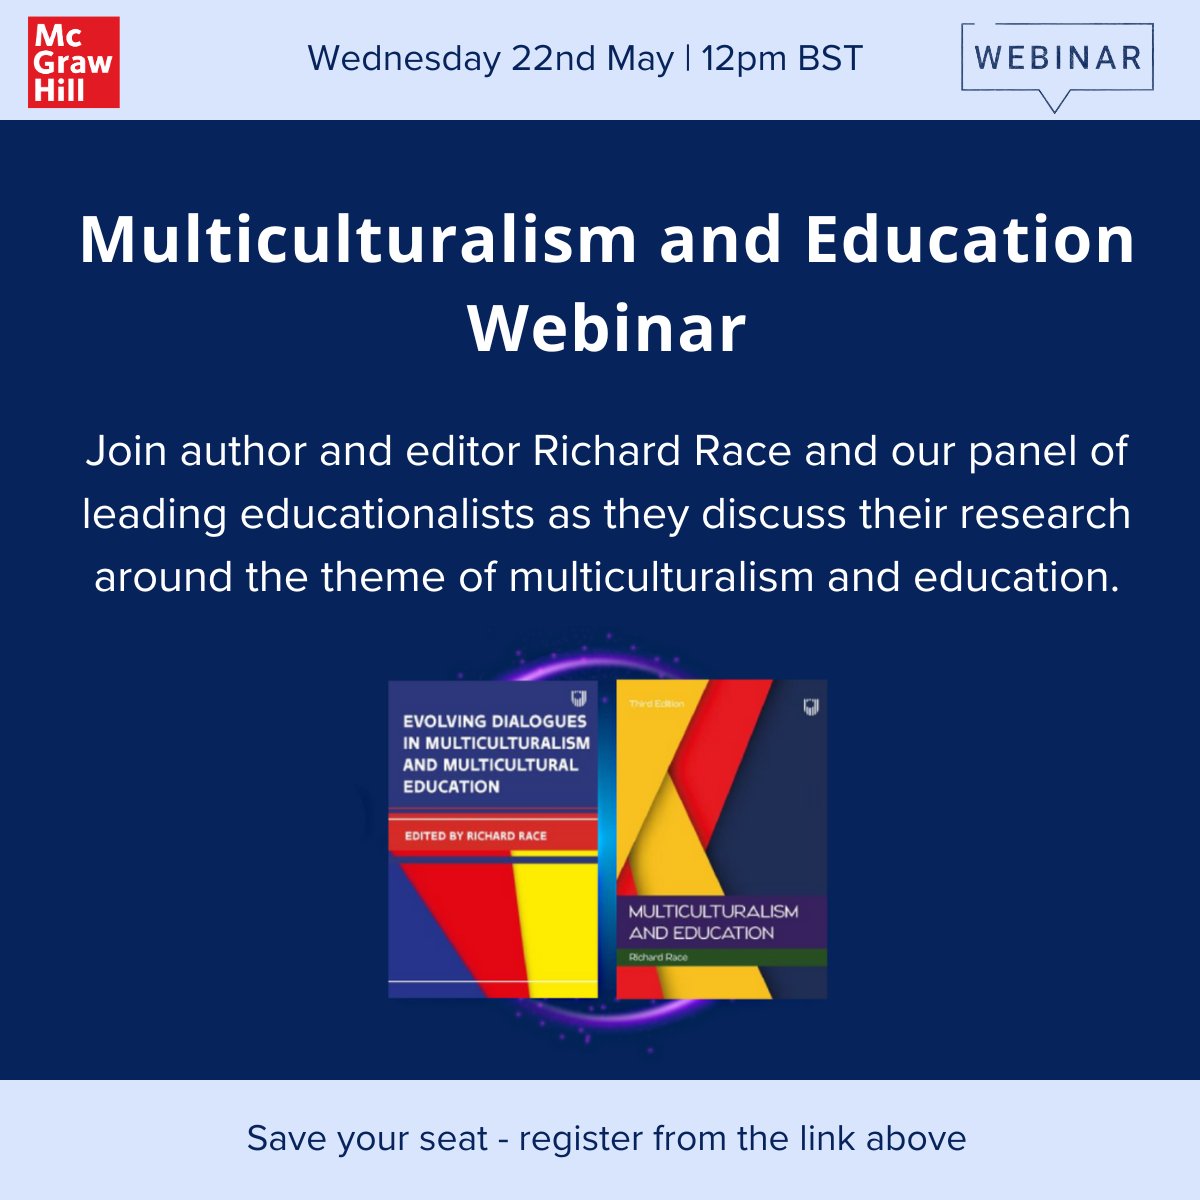 A month to go! Register for our #Multiculturalism and #Education webinar with author Dr Richard Race @TeessideUni, Maria Williams @IOE_London, @AdamLang78, @IamAdaMau and Dr Leena Robertson @MiddlesexUni on Wed 22 May at 12pm BST. Register here: mheducation.co.uk/blog/Multicult…